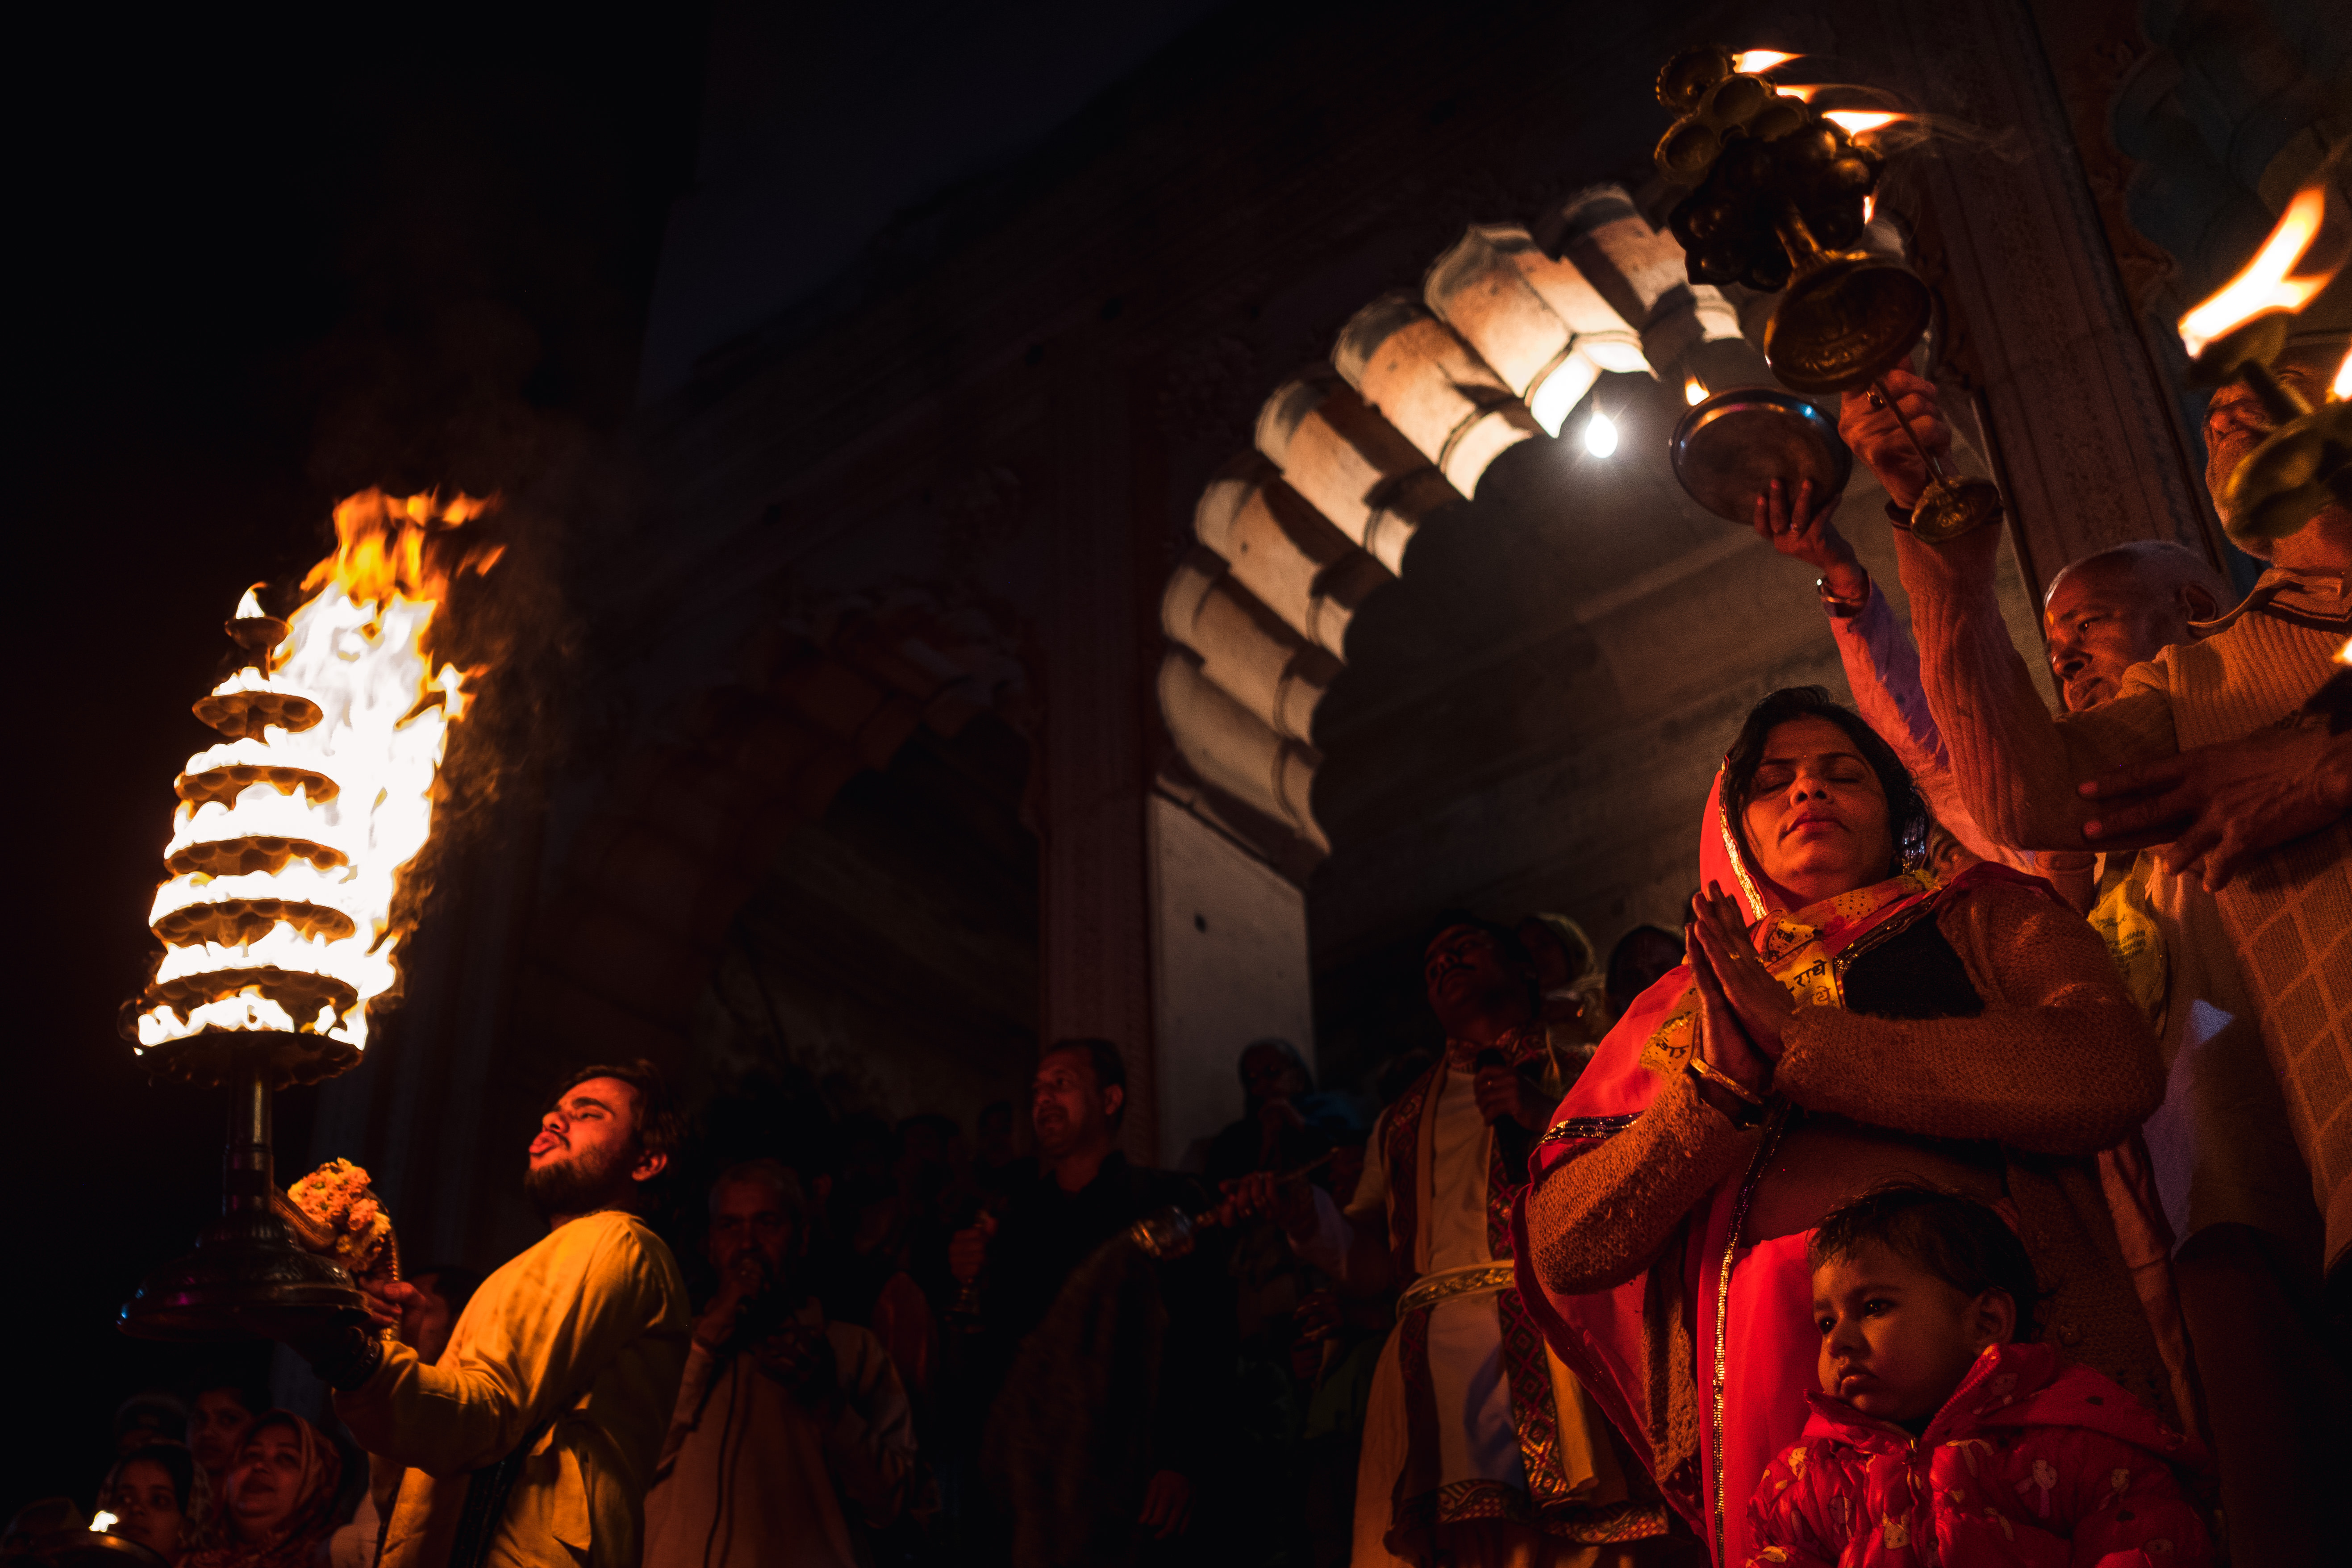 India Street Photography During Holi Festival. people pray as fire is displayed in dance. Images by Jason Vinson